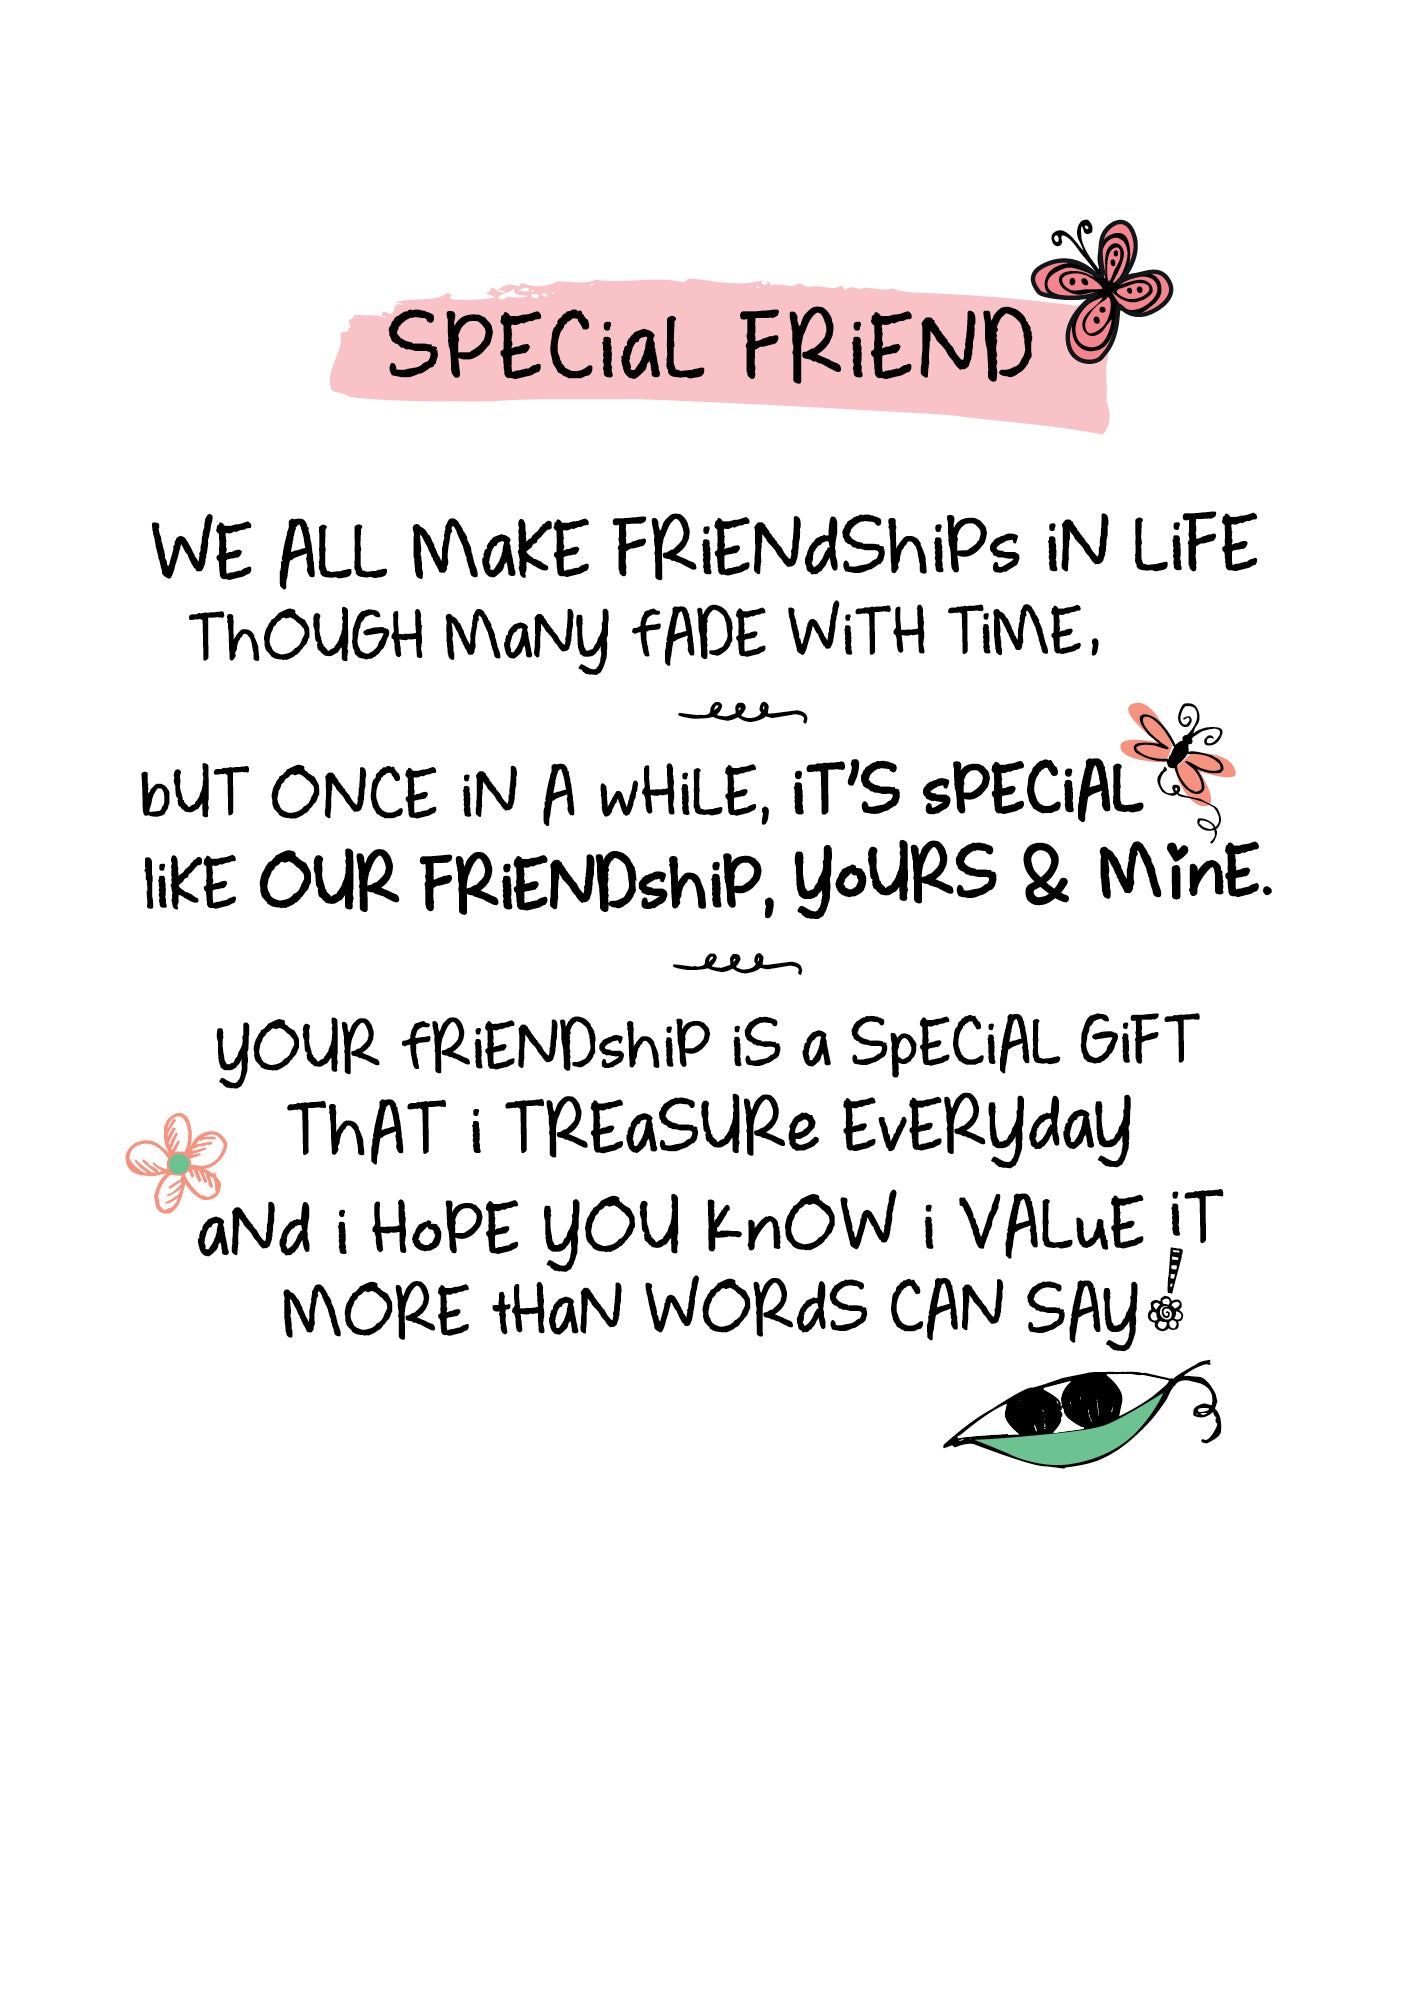 Special Friend Inspired Words Greeting Card Blank Inside